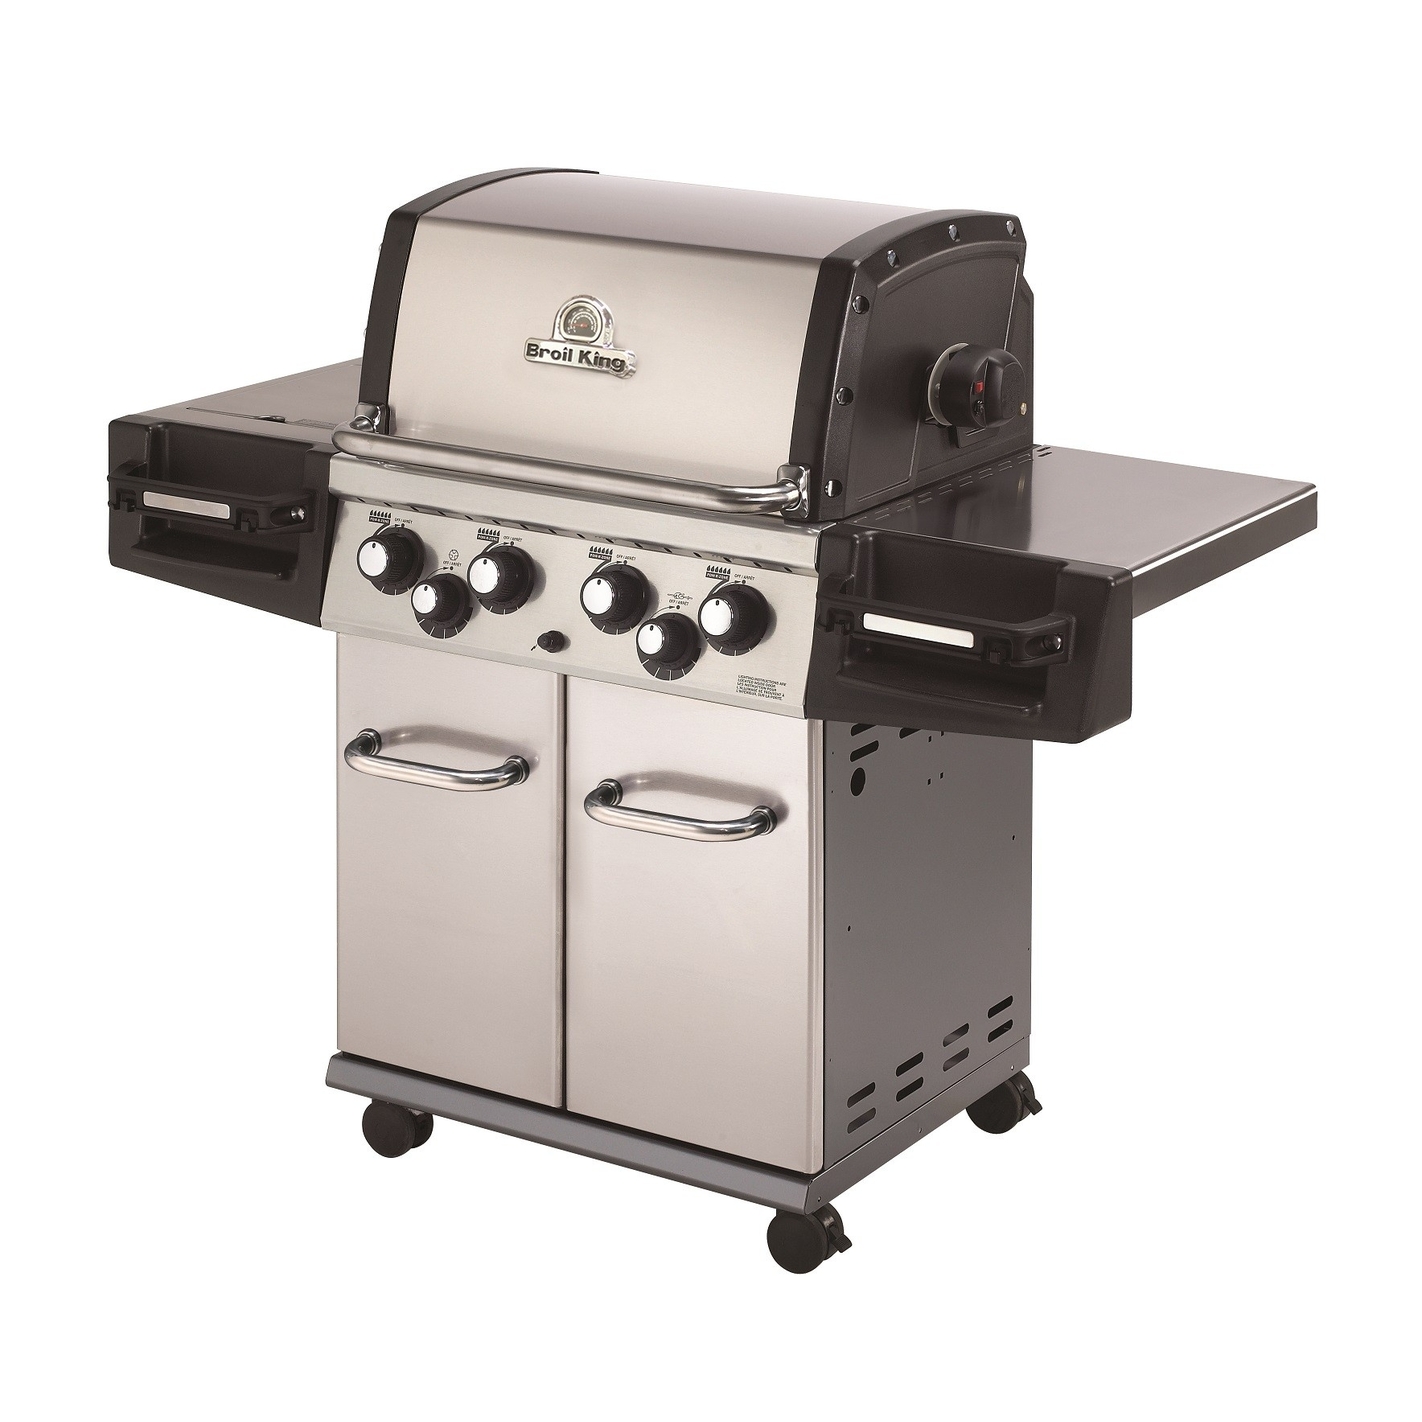 barbecue weber o broil king